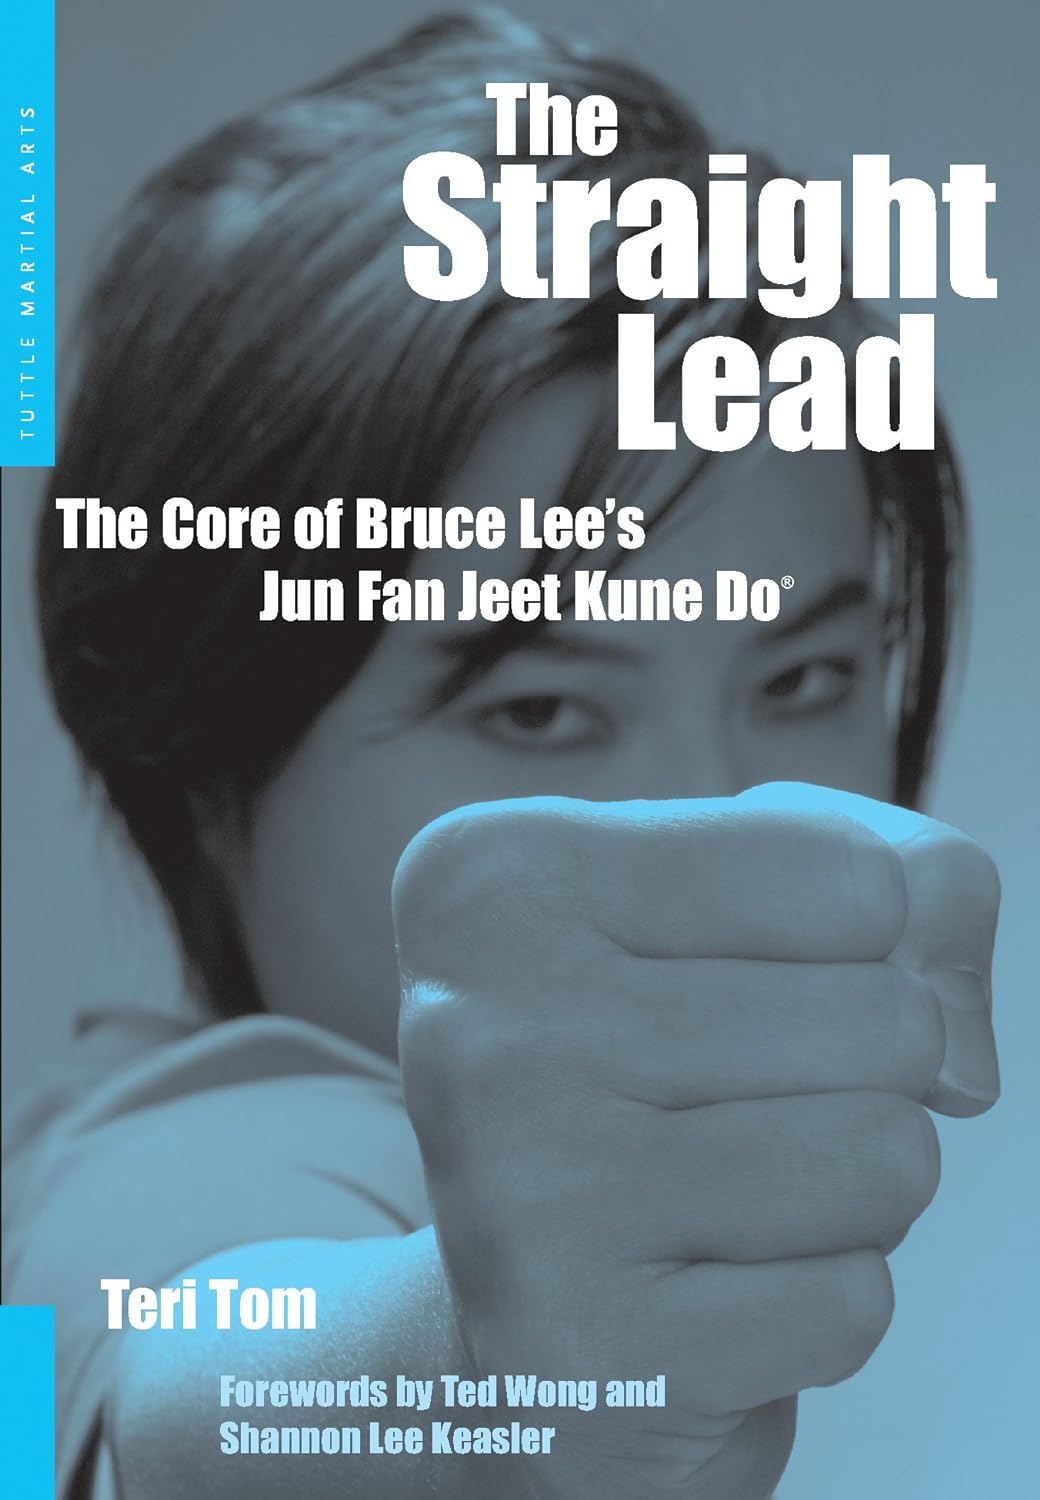 The Straight Lead: The Core of Bruce Lee's Jun Fan Jeet Kune Do Book by Teri Tom (Preowned)